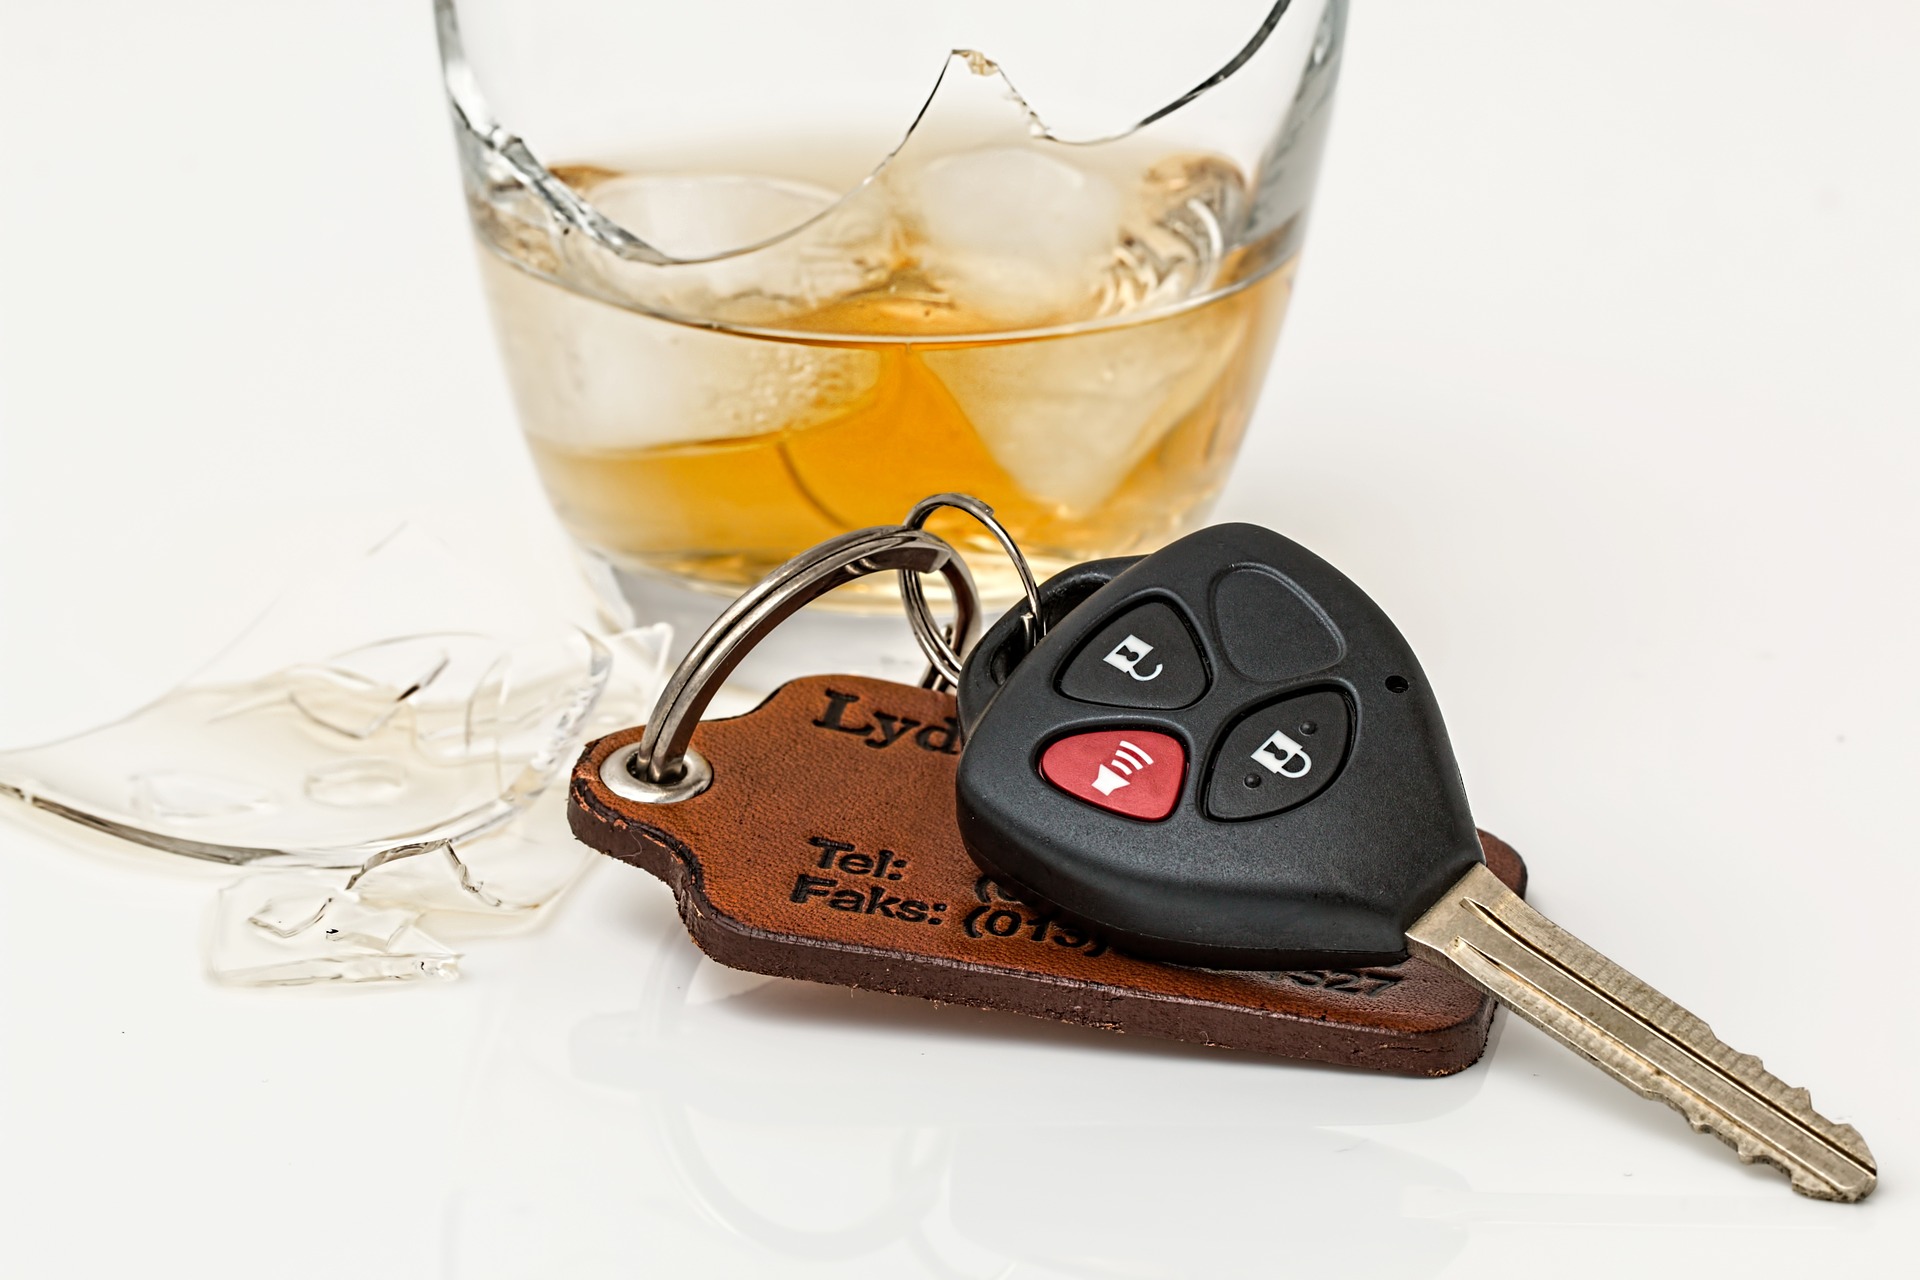 Forms of Impaired Driving